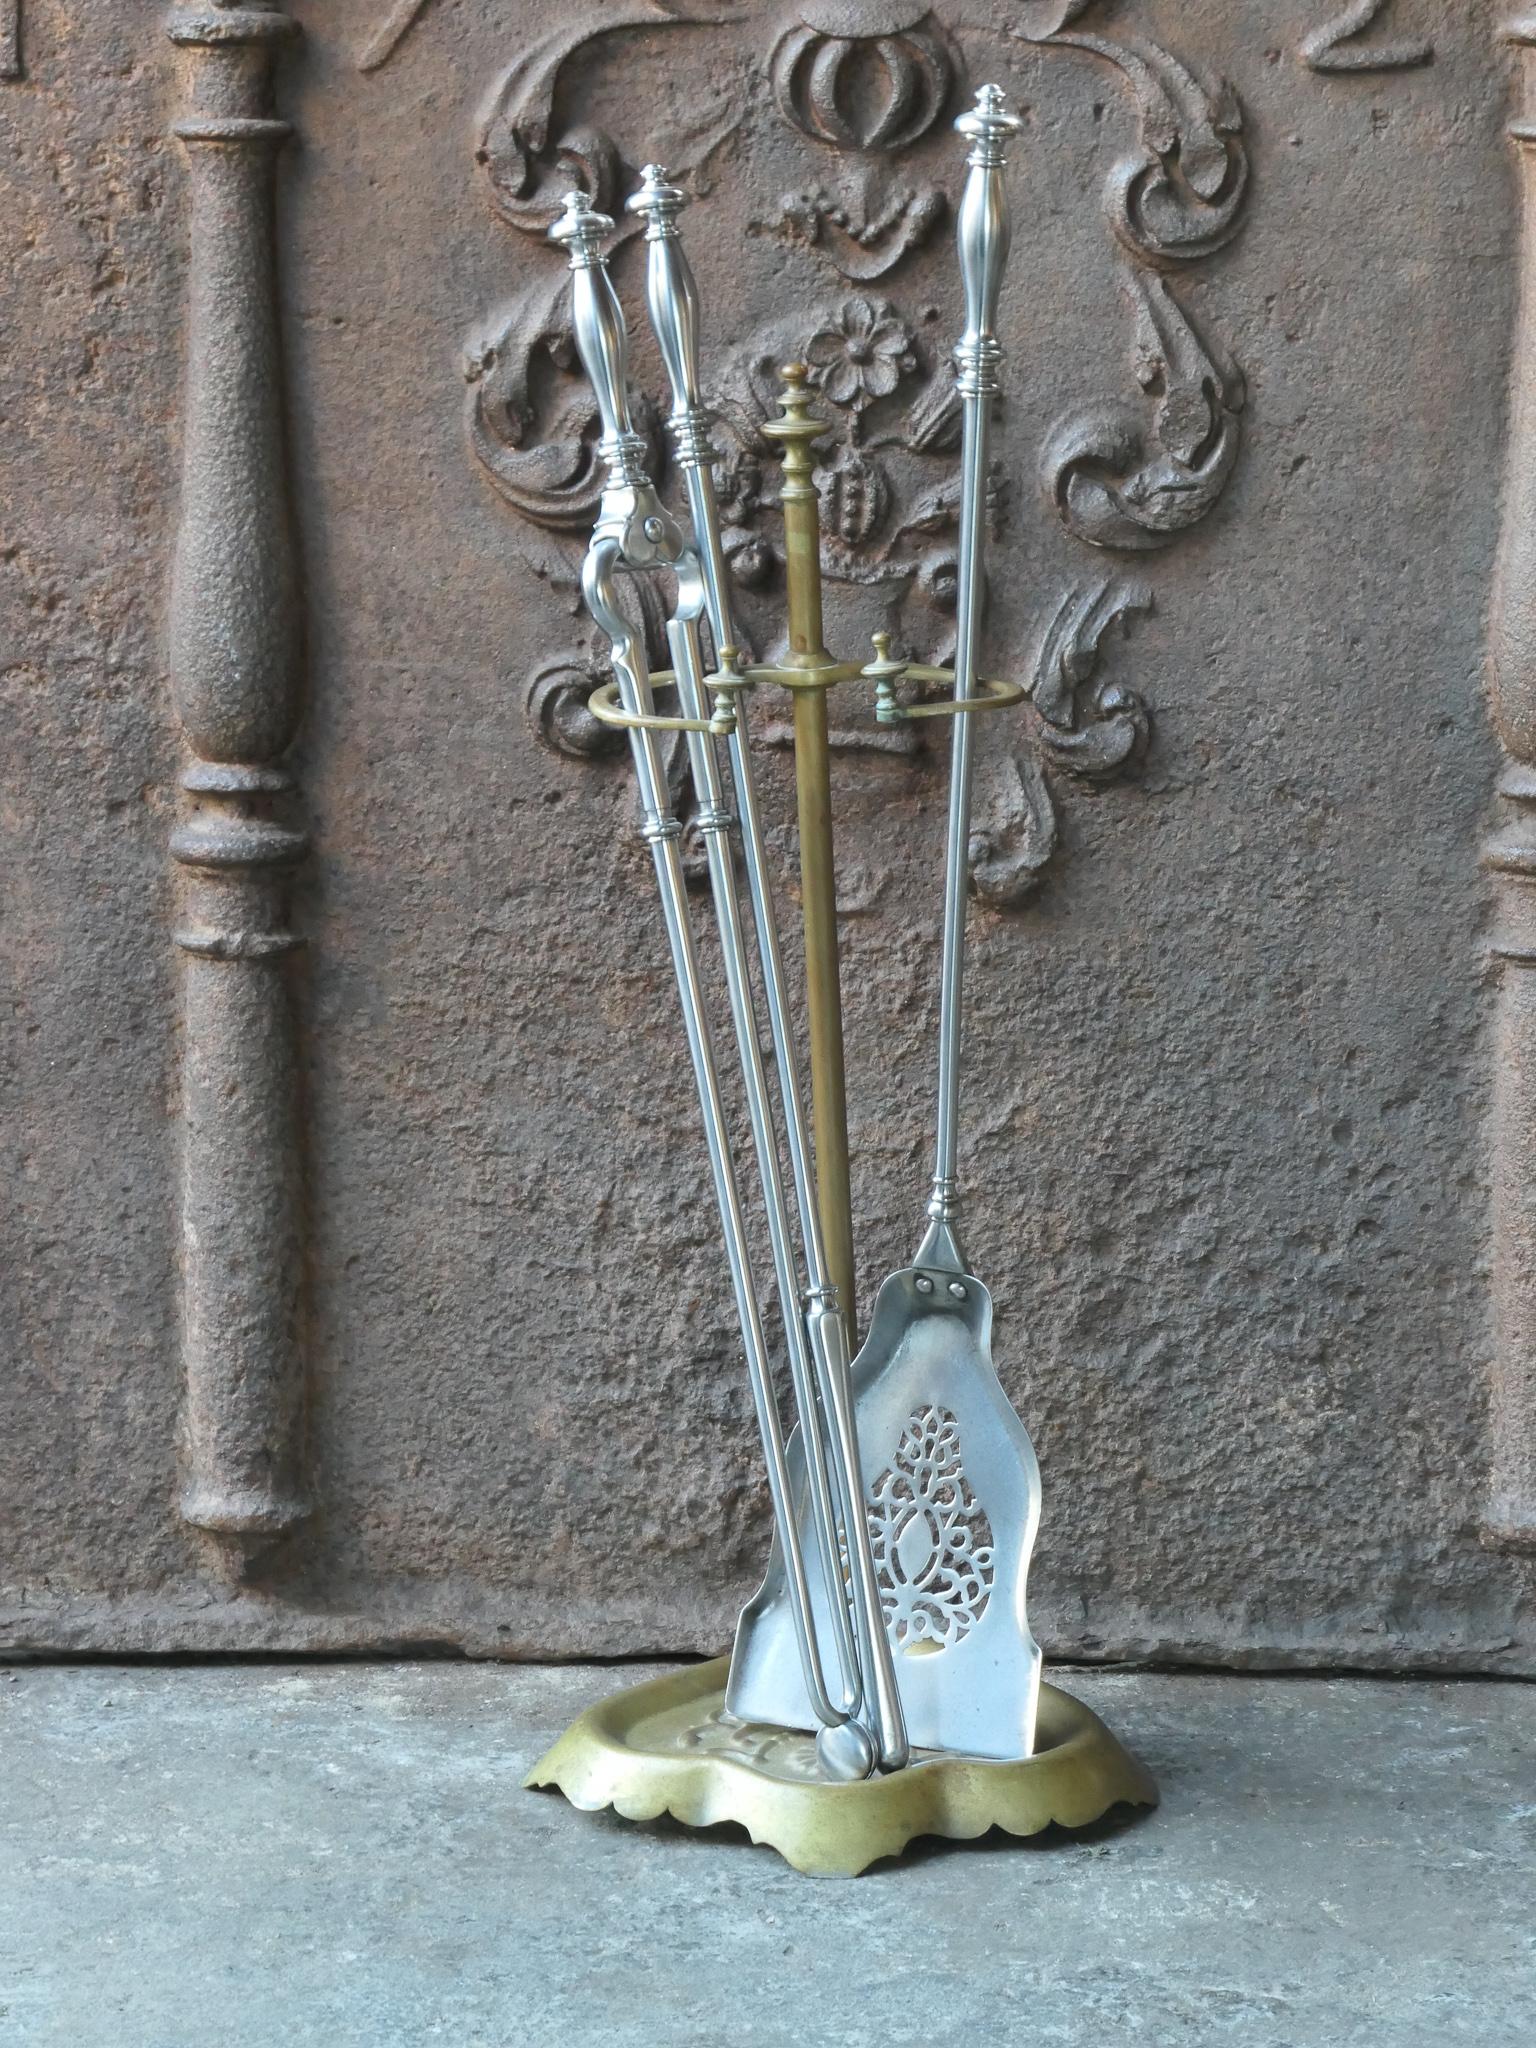 Beautiful 18th - 19th century English Georgian fireplace companion set. The tool set consists of tongs, shovel, poker and stand. All with fine decorations. The tools are made from polished steel. The stand is made from brass. The set is in a good